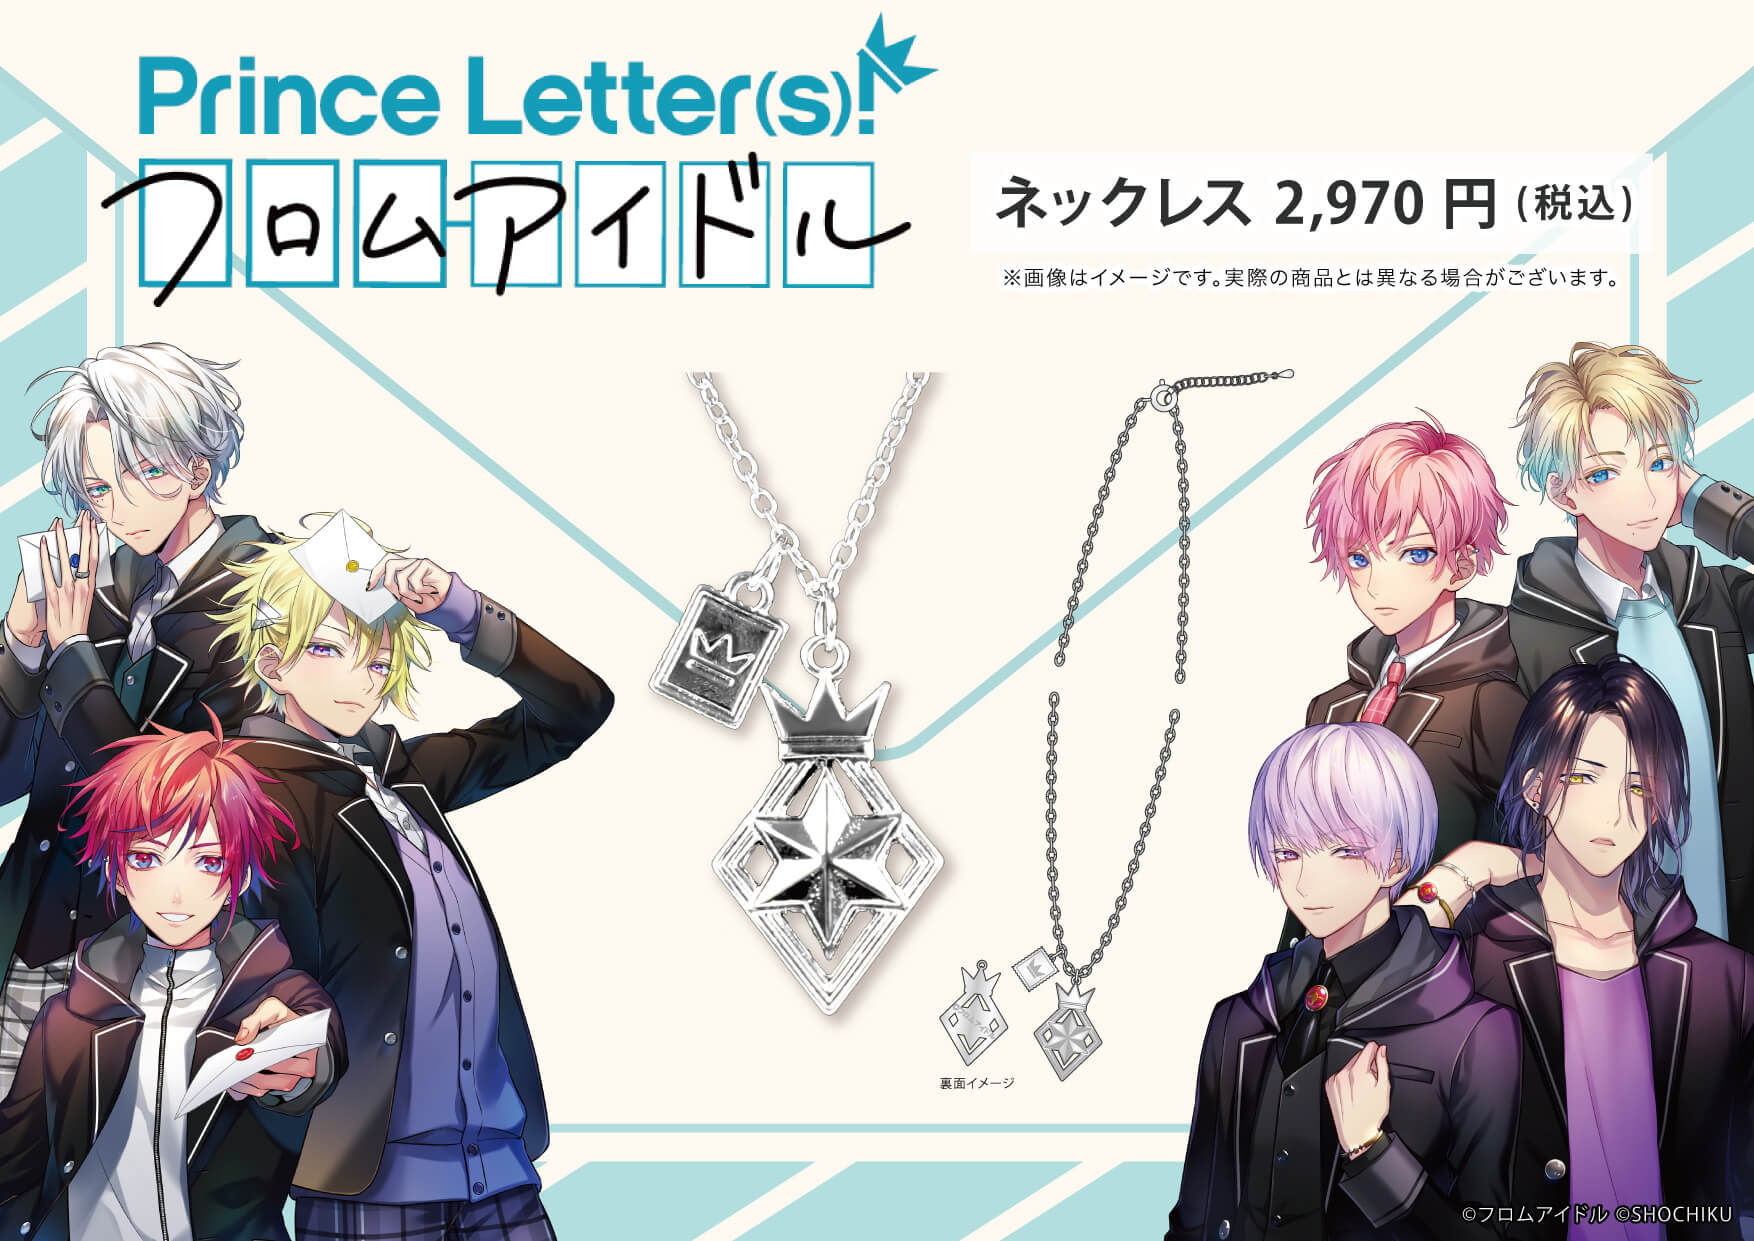 Prince Letter(s)! フロムアイドル』から新作グッズが登場！“私立常